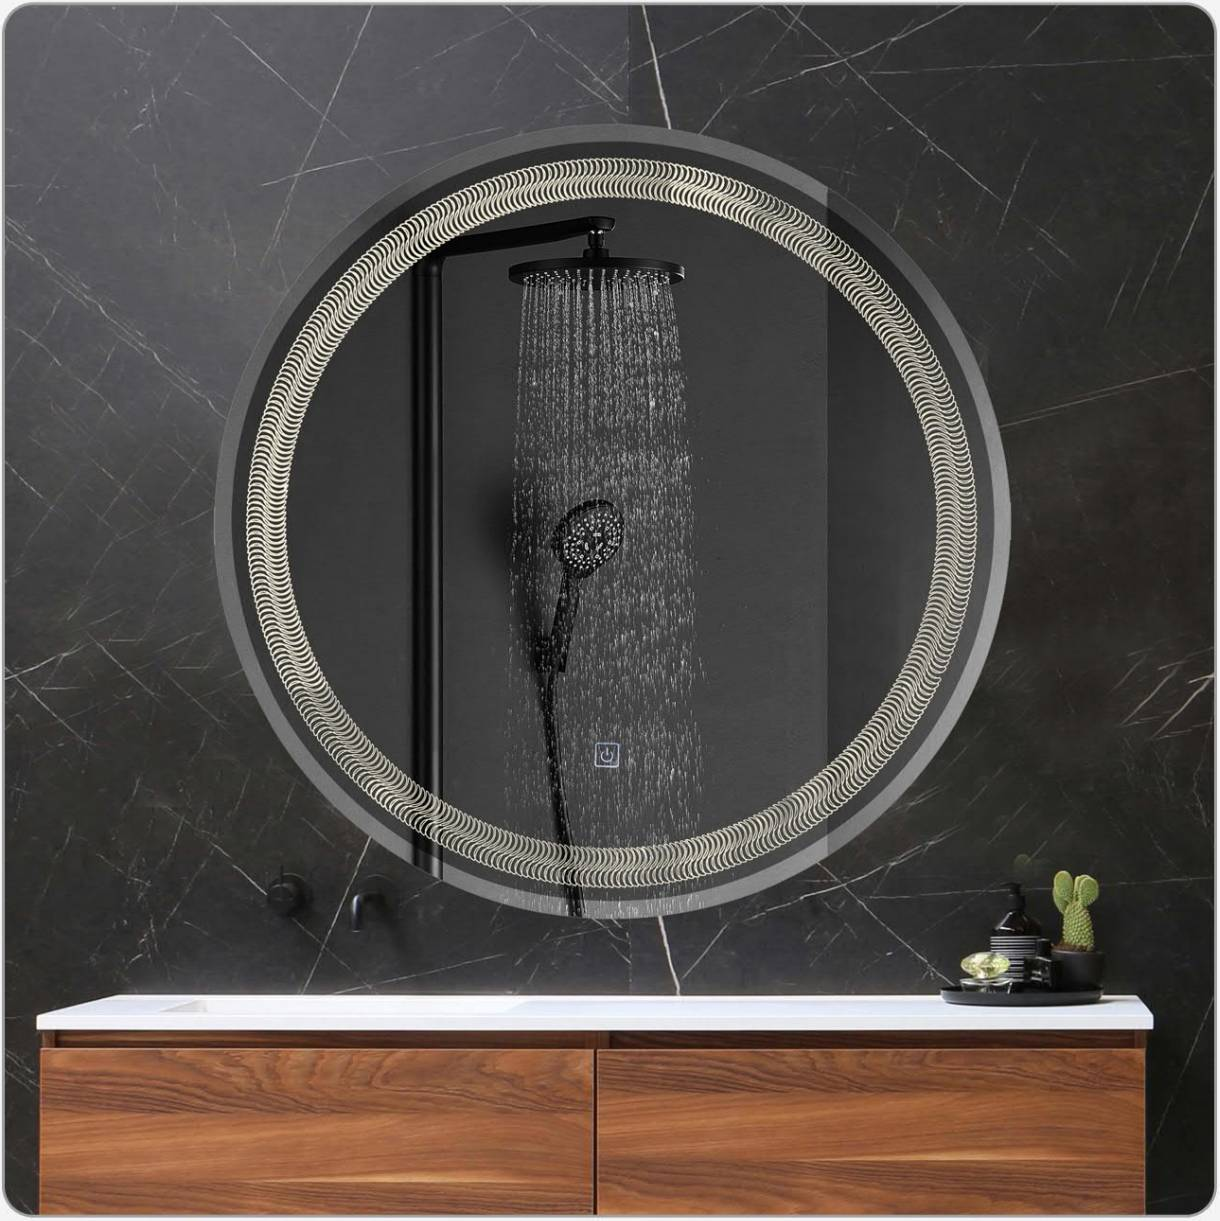 Zhuotai Round LED Mirror with Metal Frame And Bevel